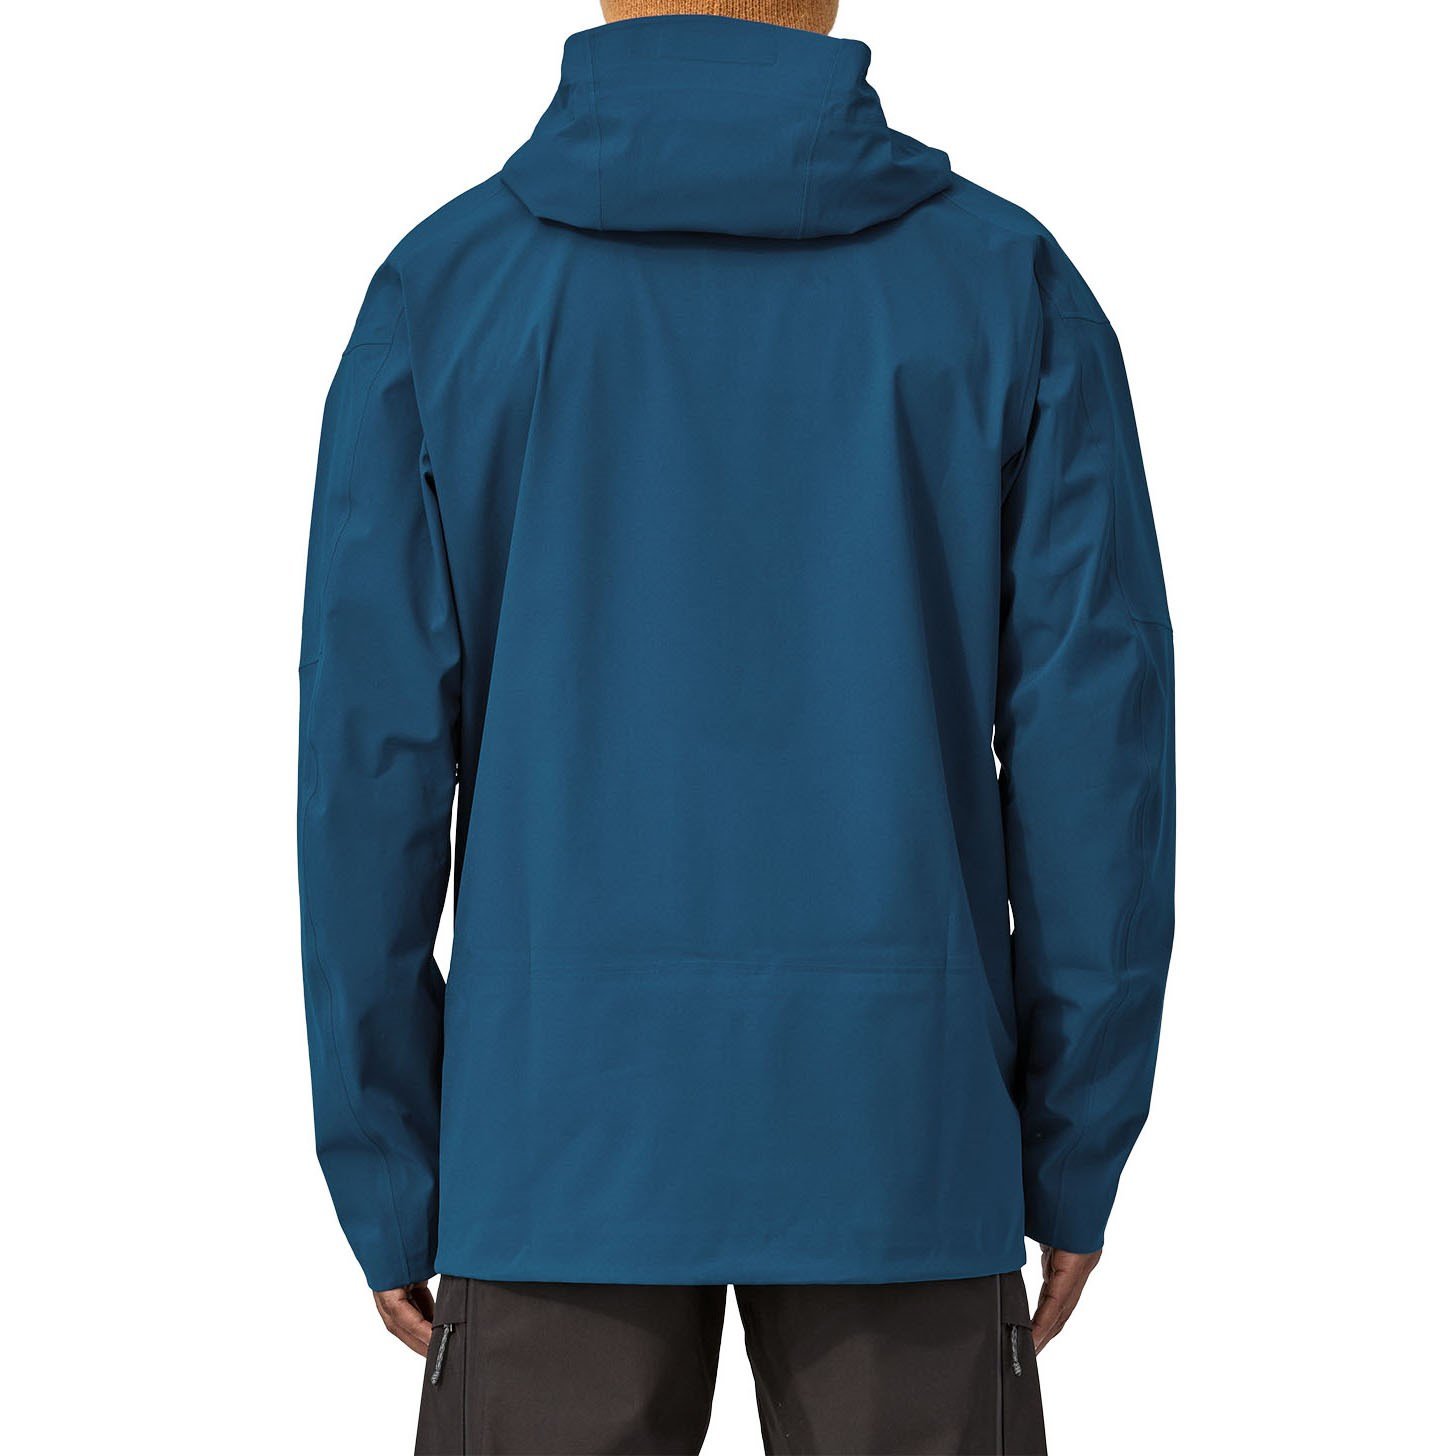 Patagonia SnowDrifter Men's Jacket Review: A 3-Layer Shield Born for the  Backcountry